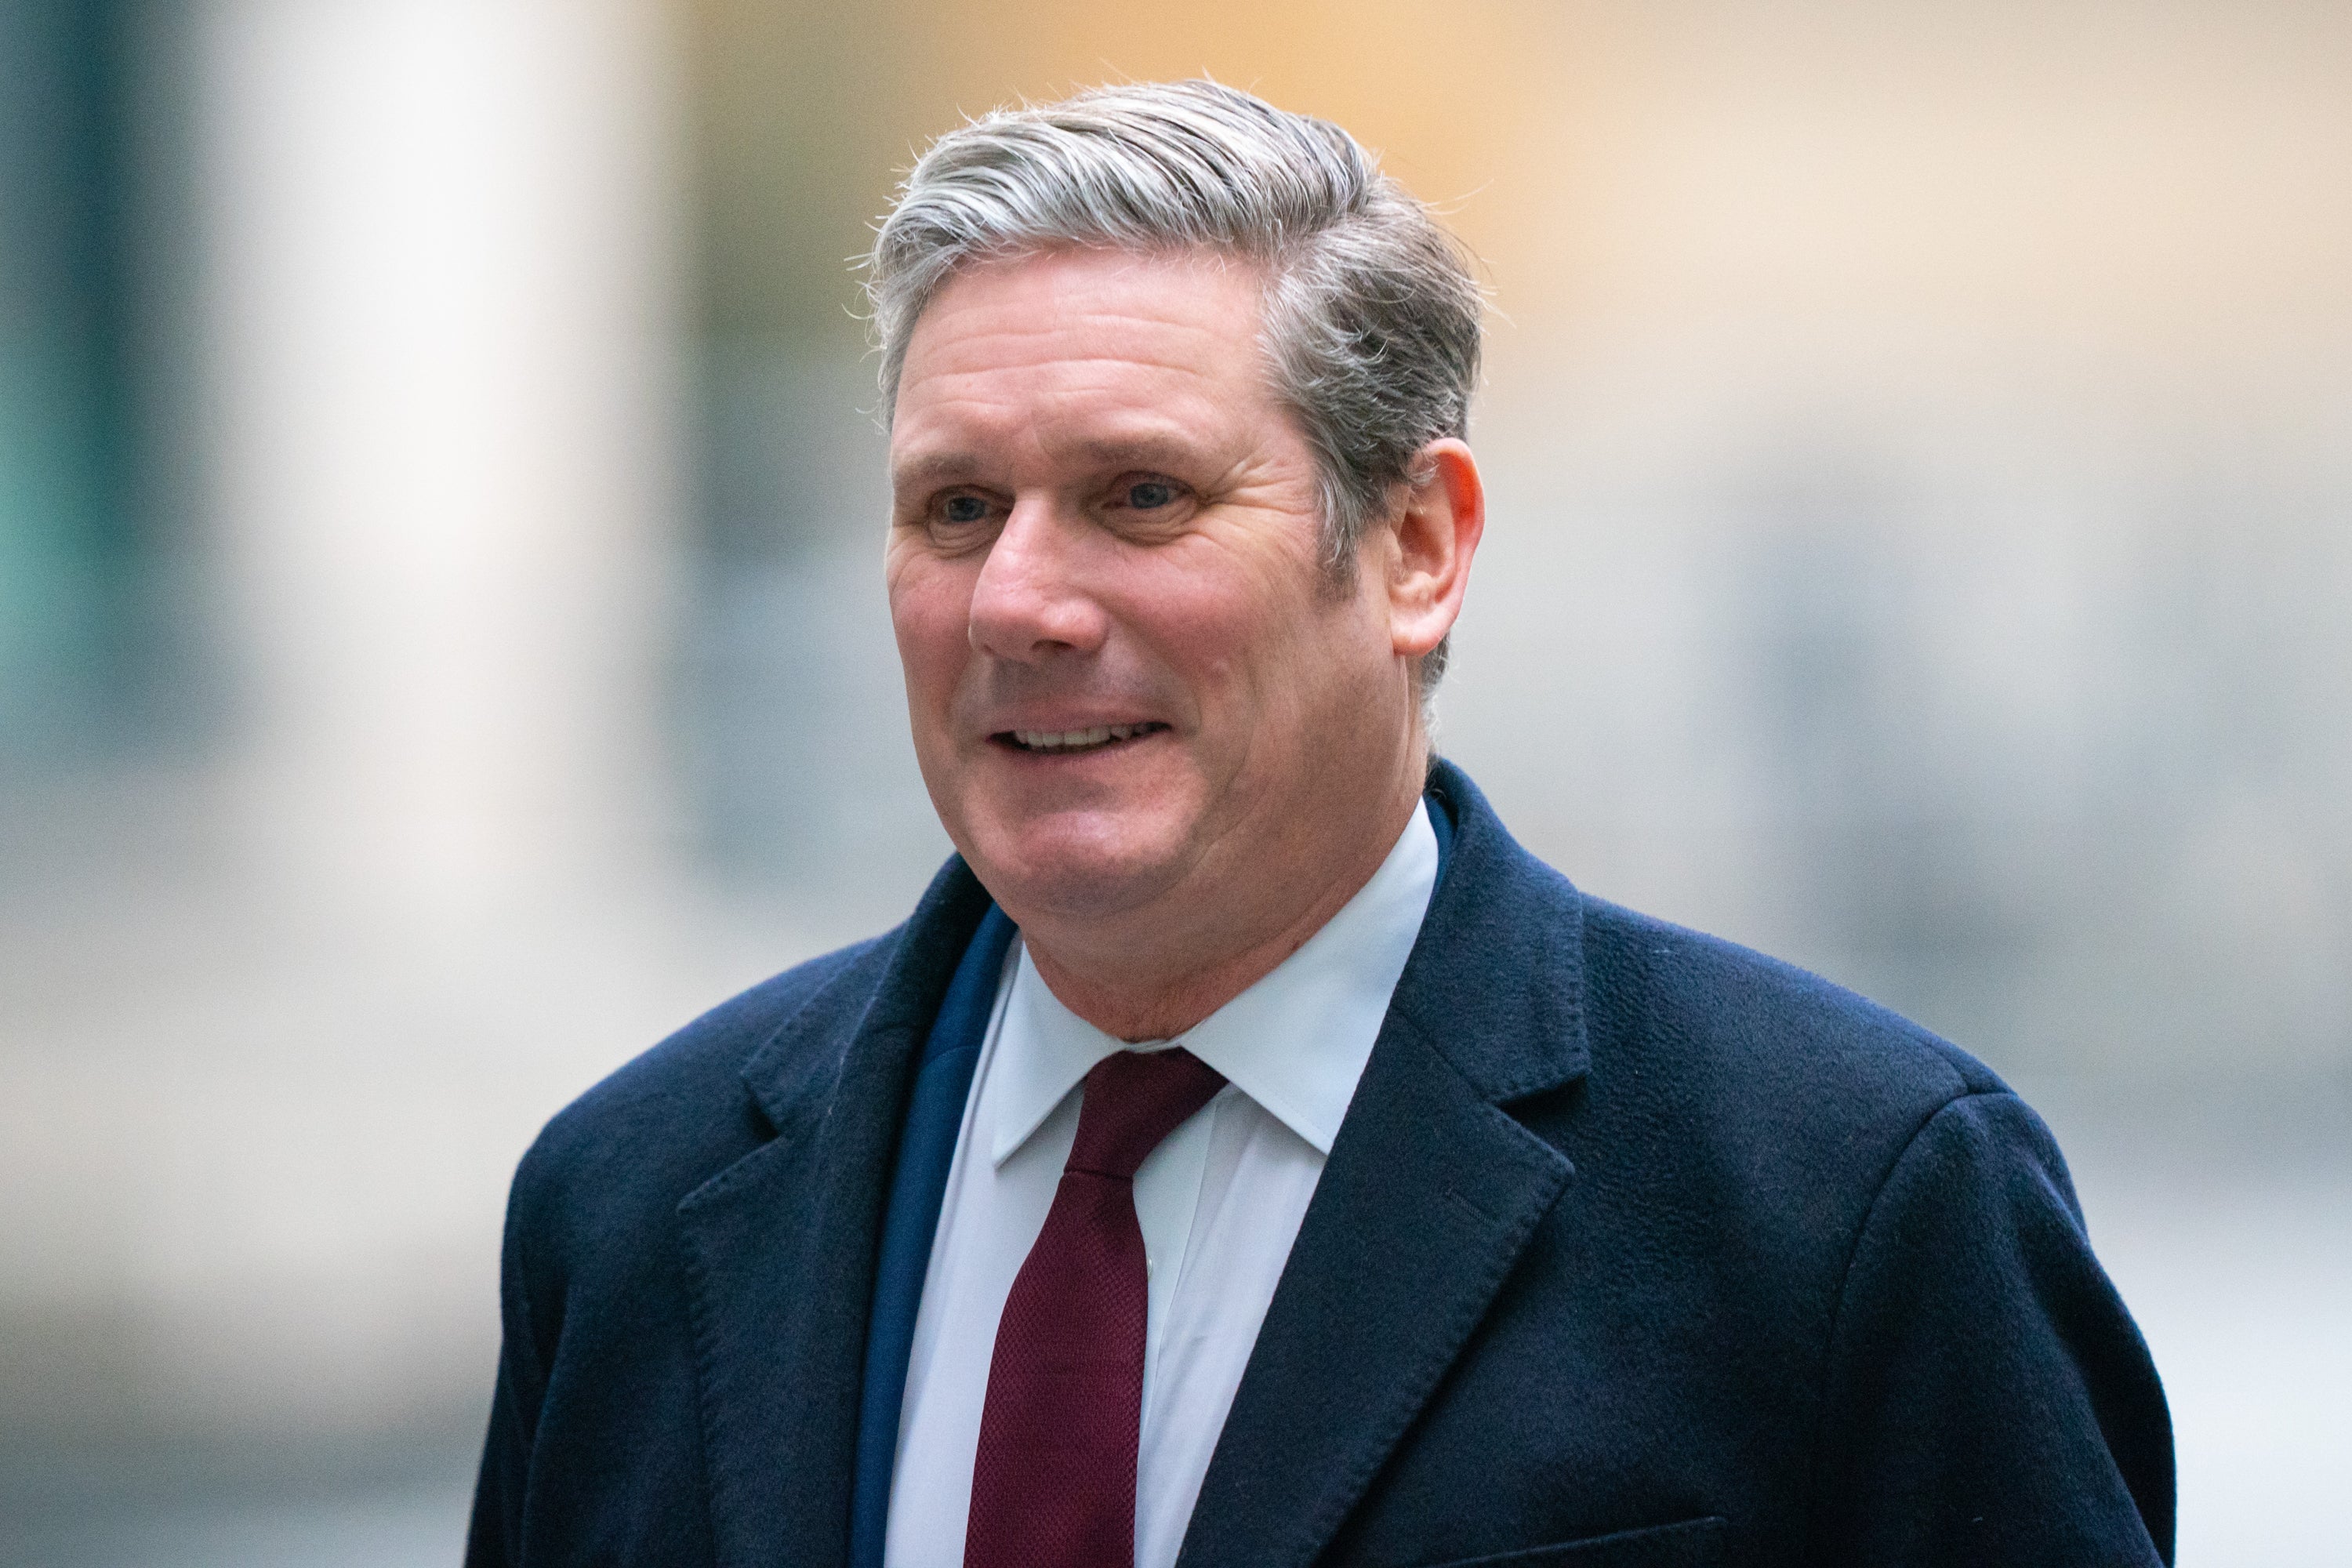 Sir Keir Starmer in the clear over office beer | The Independent